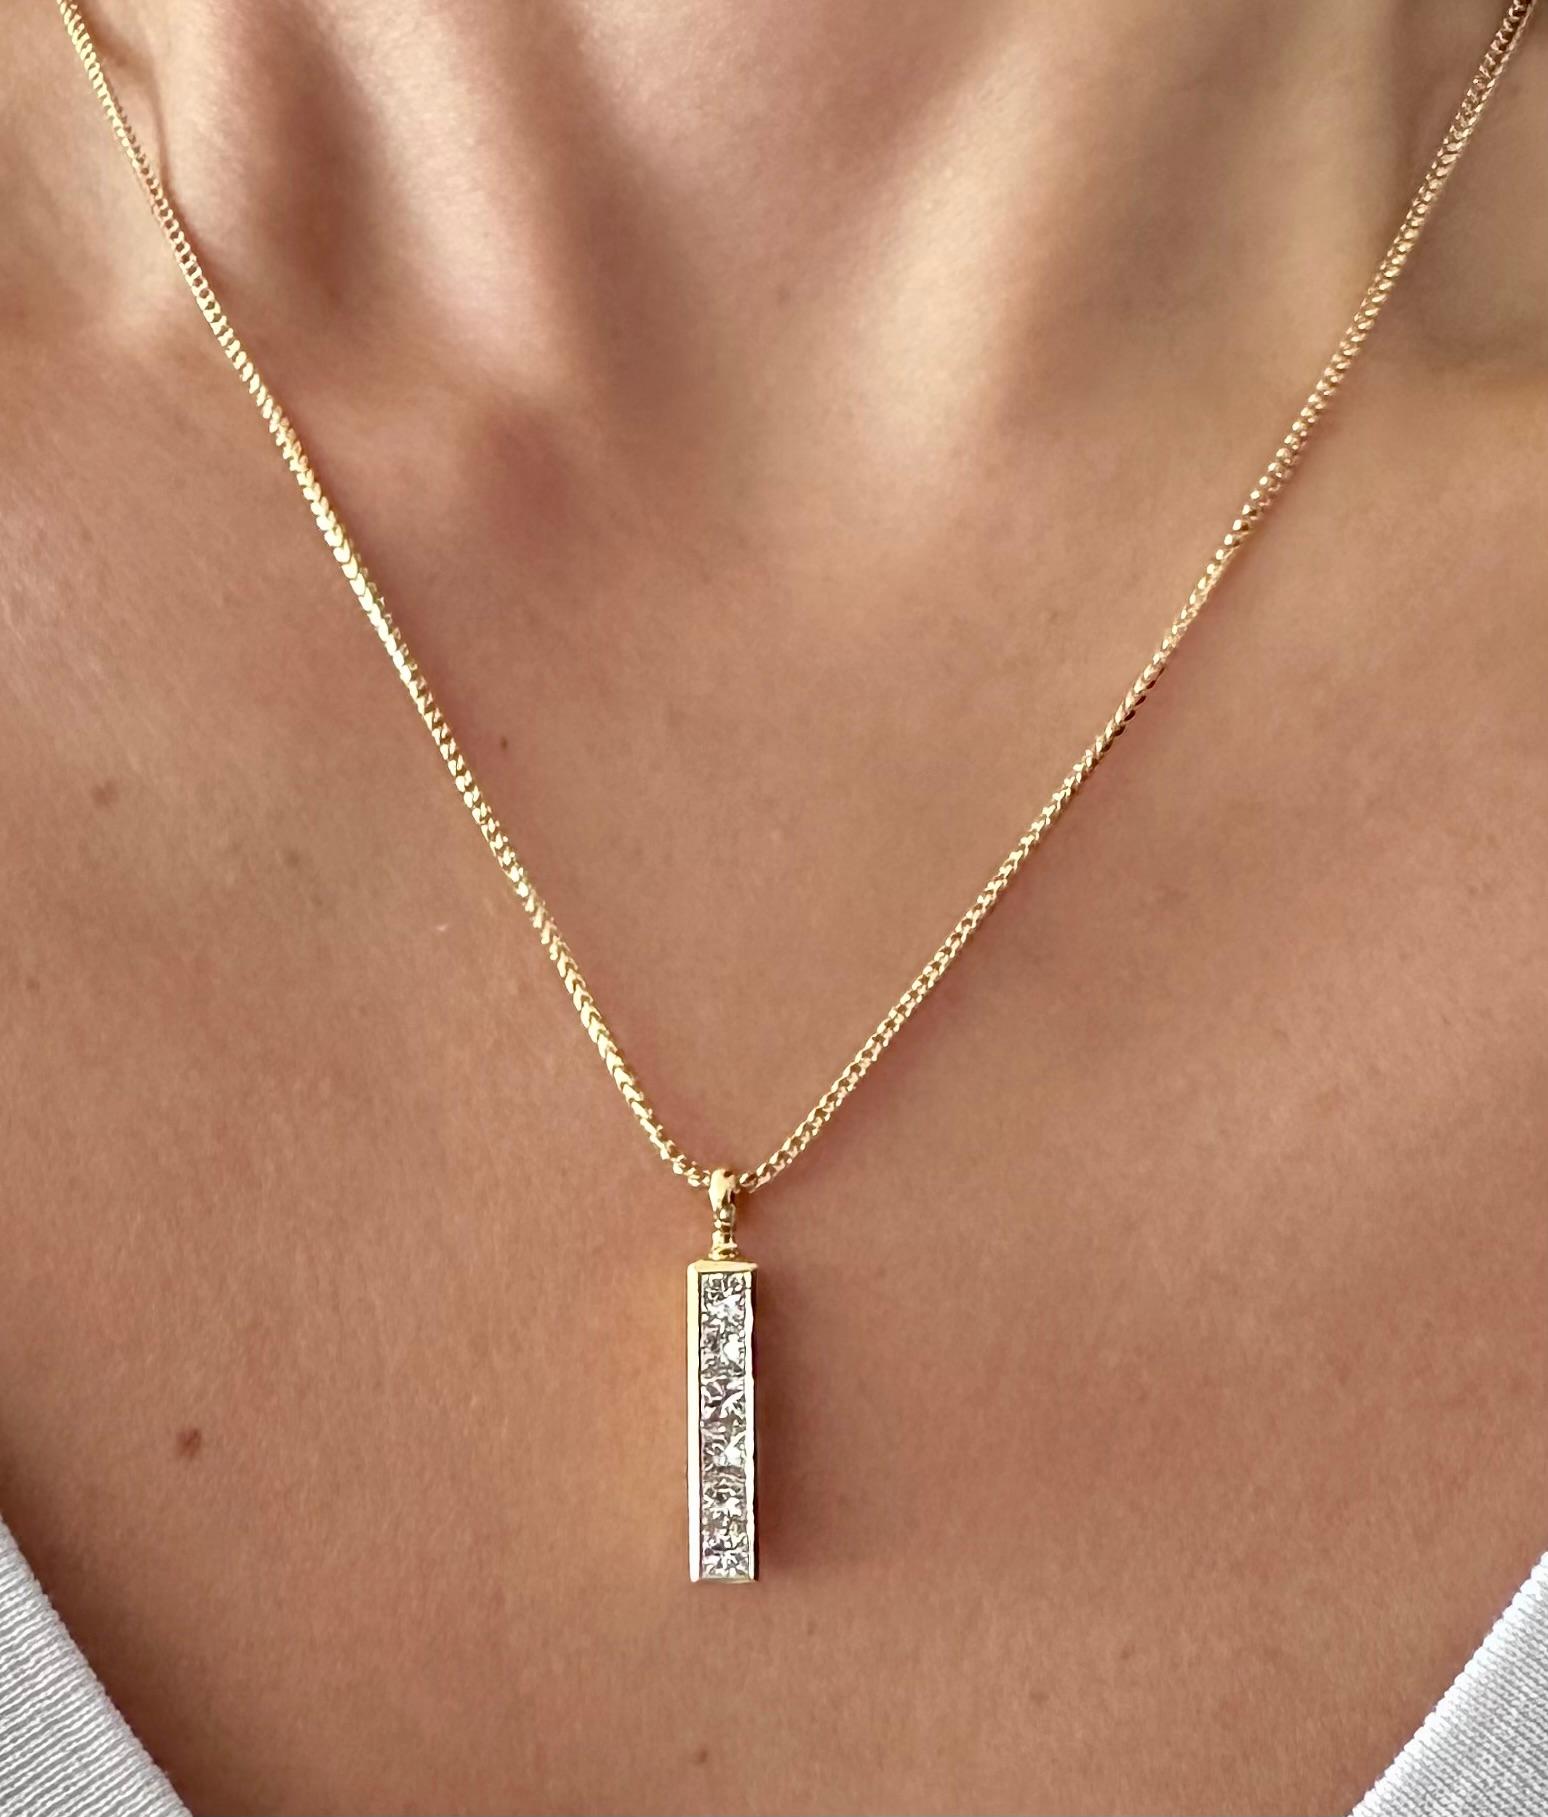 Theo Fennell Pendant from the Strip collection. The pendant comprises of a vertical bar with 6 princess cut diamonds in a rubover setting, with a total weight of 1.20ct, G colour and VS clarity. The pendant features a loop bail with the correct Theo